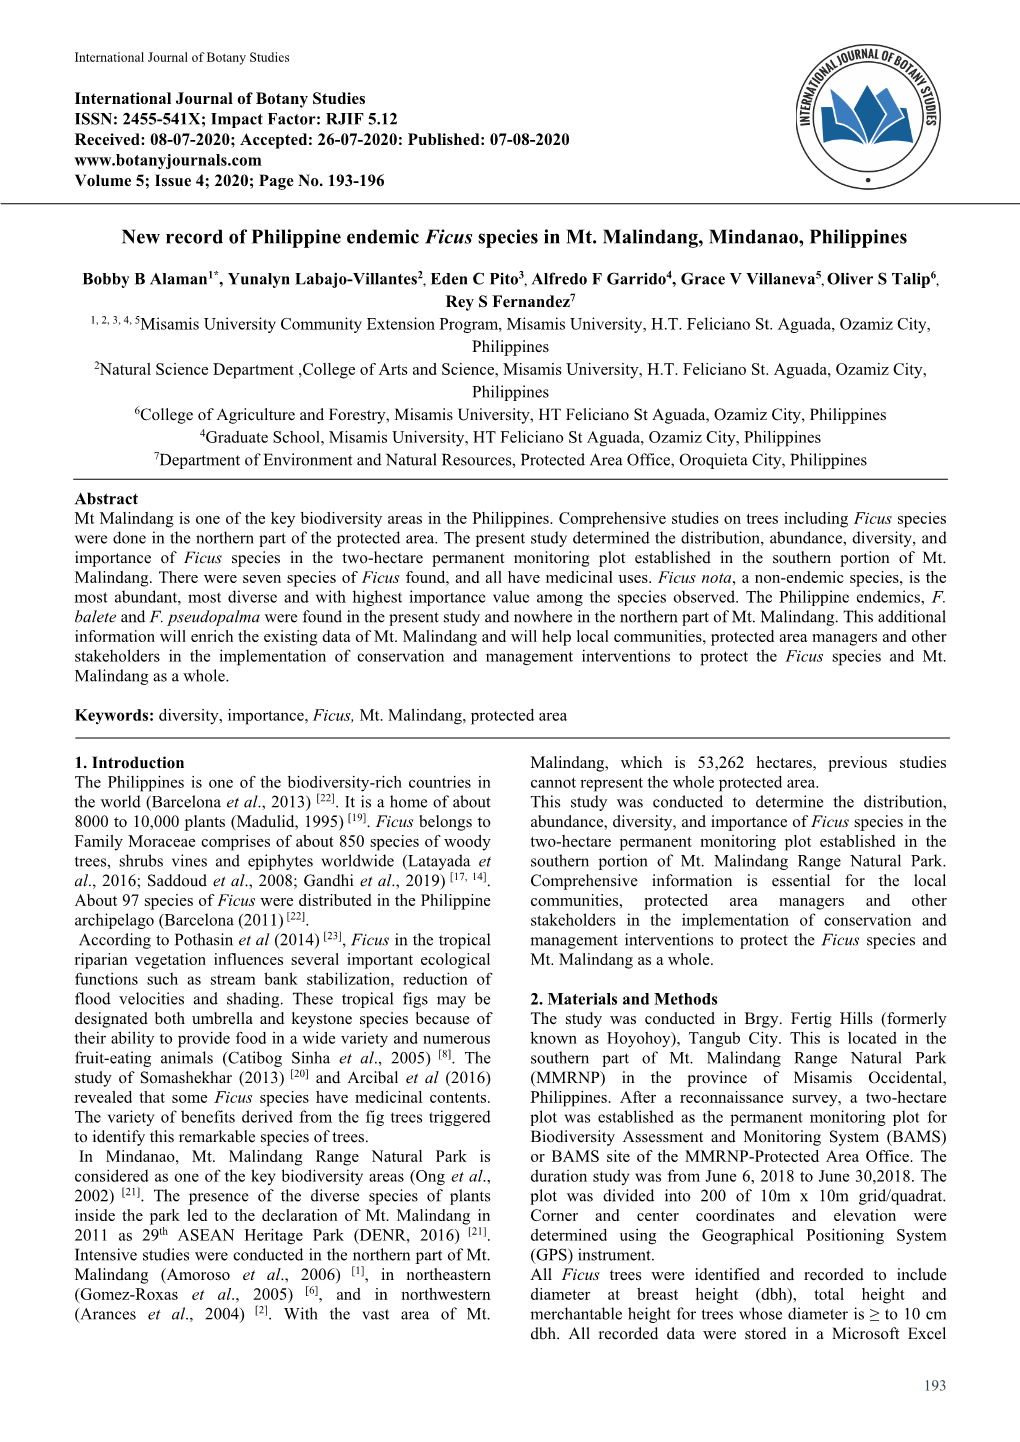 New Record of Philippine Endemic Ficus Species in Mt. Malindang, Mindanao, Philippines